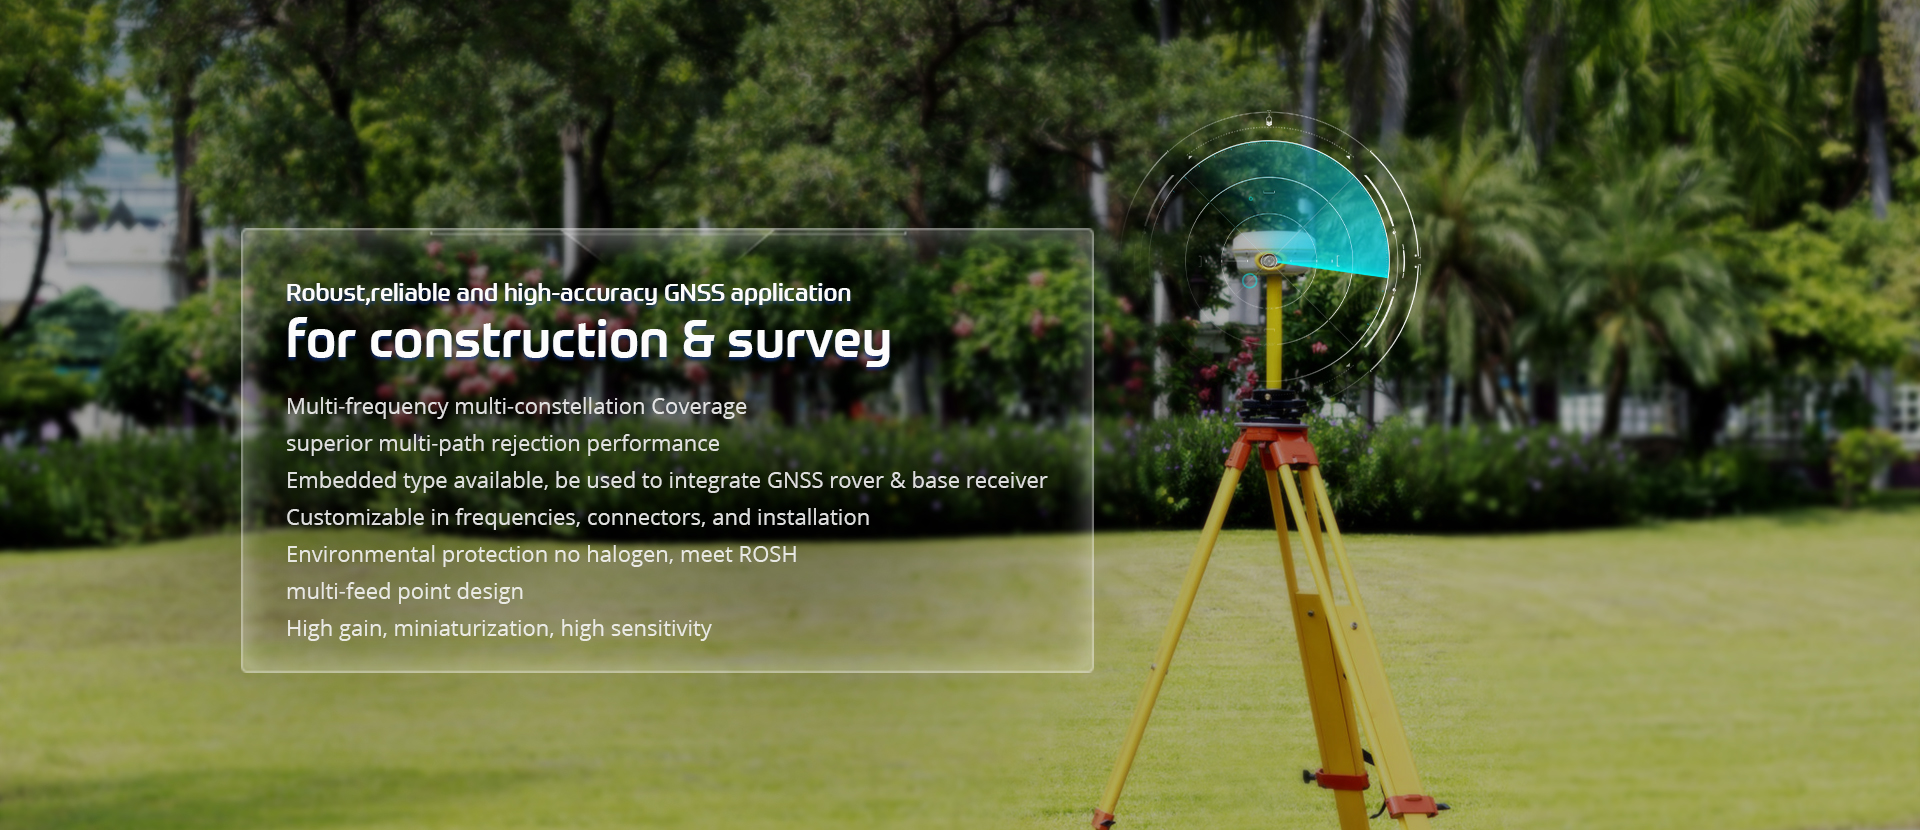 Robust, reliable and high-accuracy GNSS application for construction 5 survey